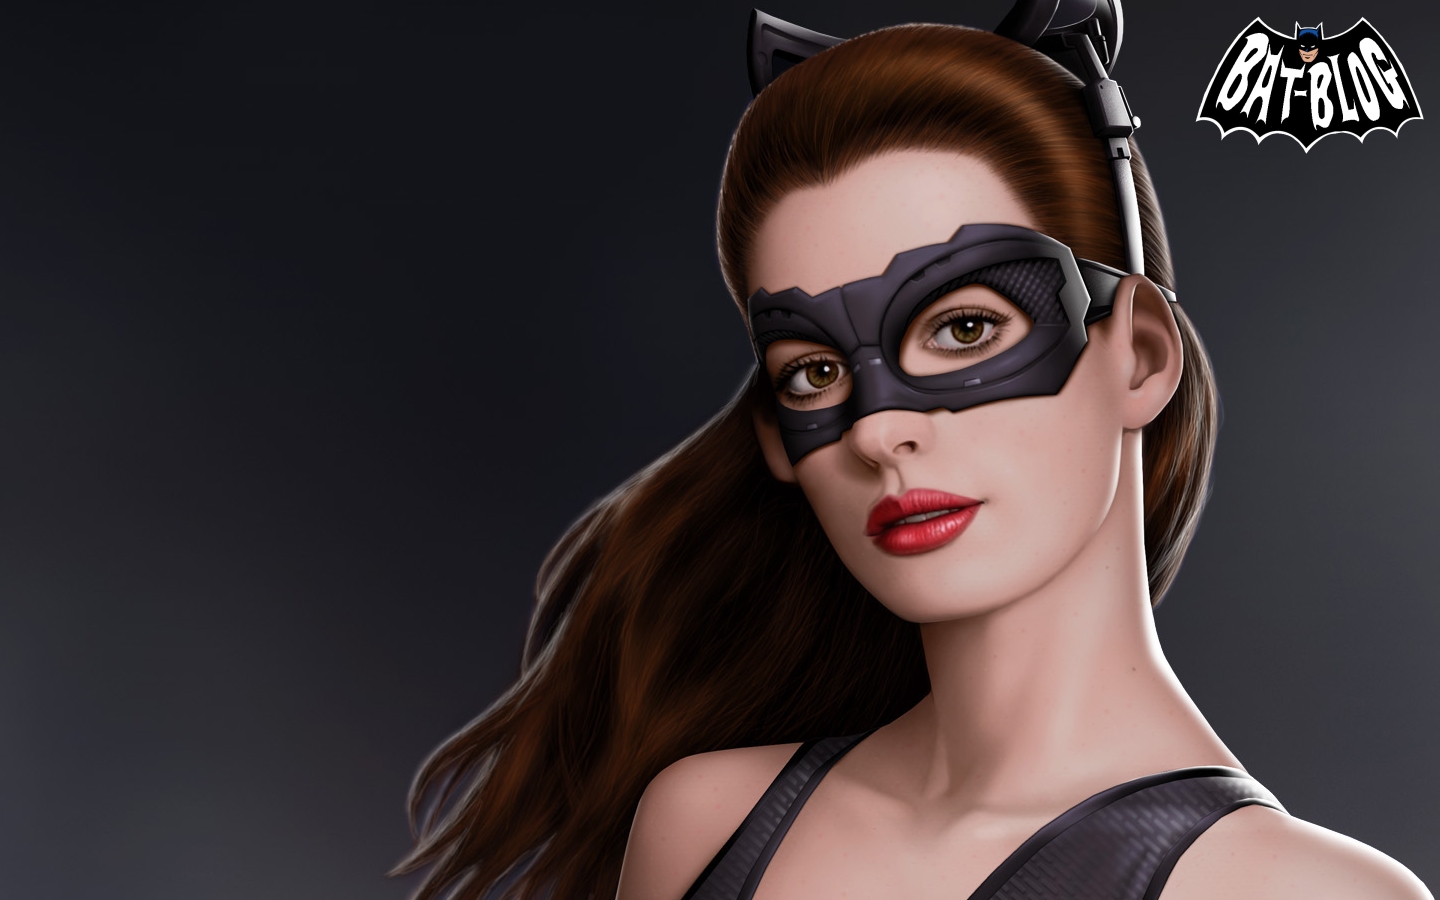 And Collectibles Purrfect Catwoman Wallpaper To Brighten Your Life